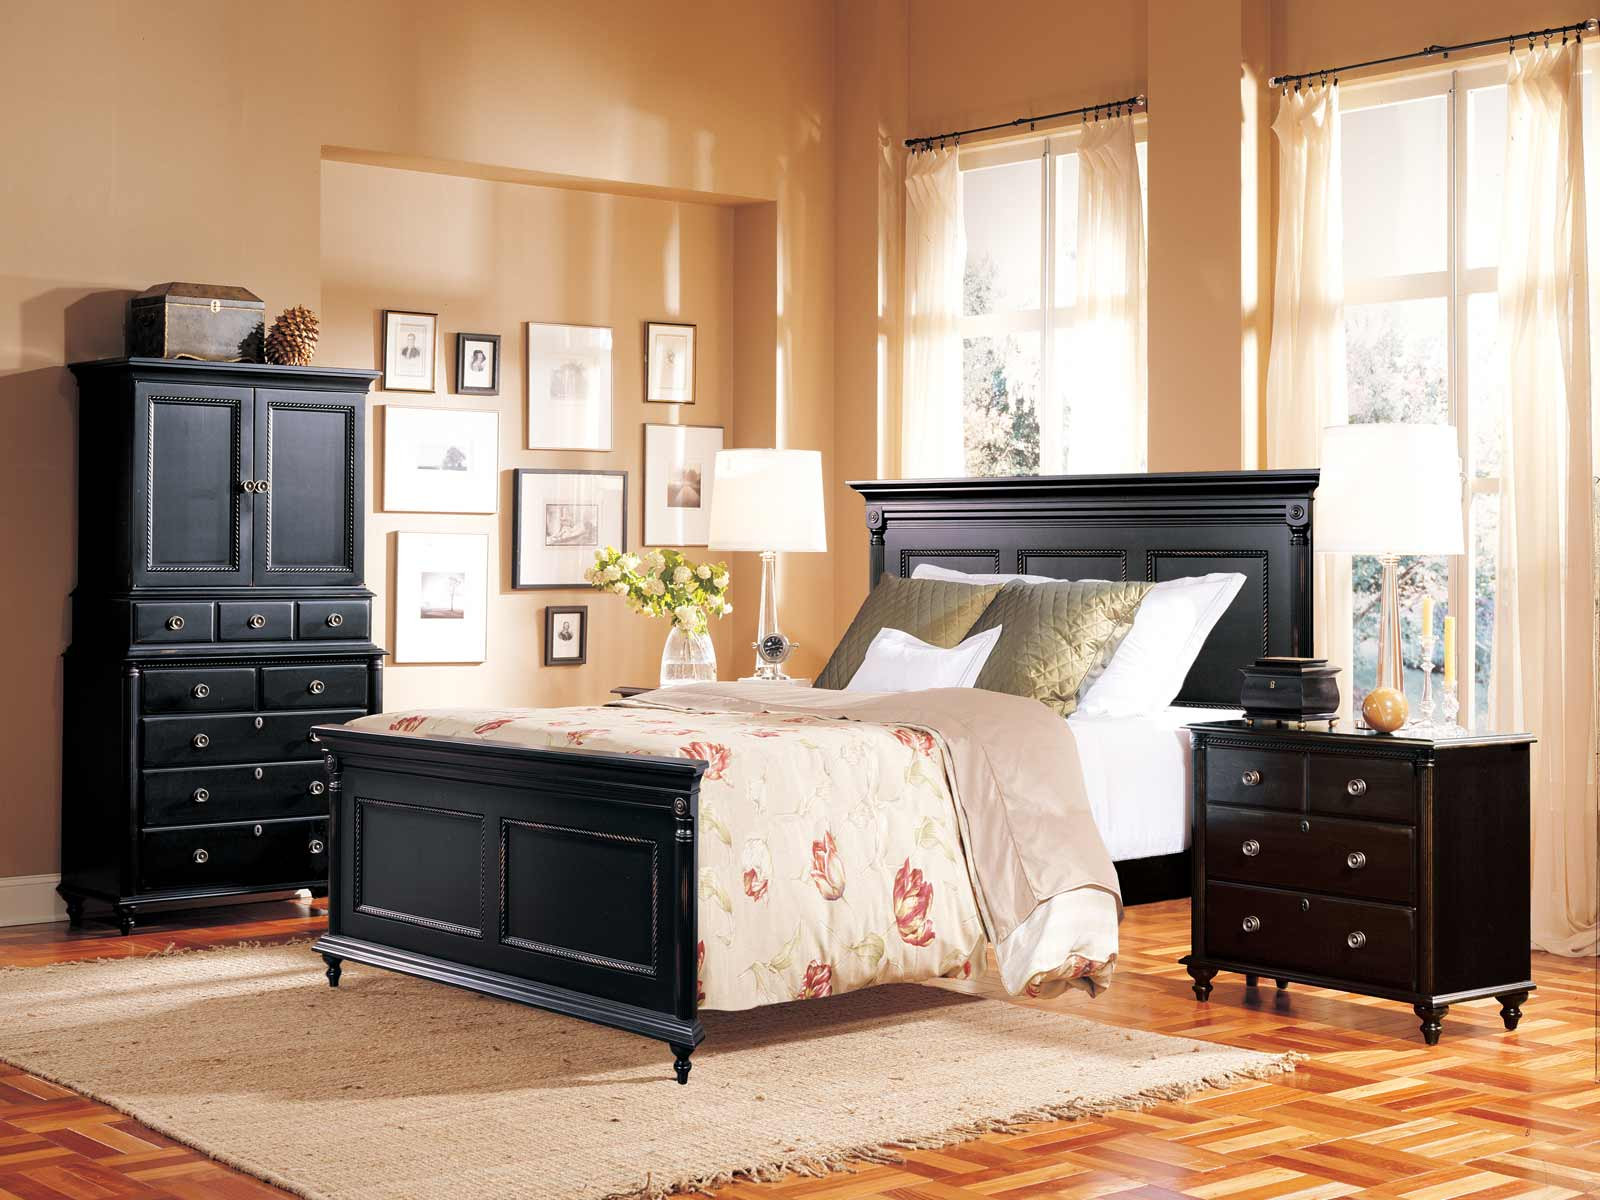 Durham Furniture Savile Row 4 Piece Panel Bedroom Set In Antique Black for size 1600 X 1200